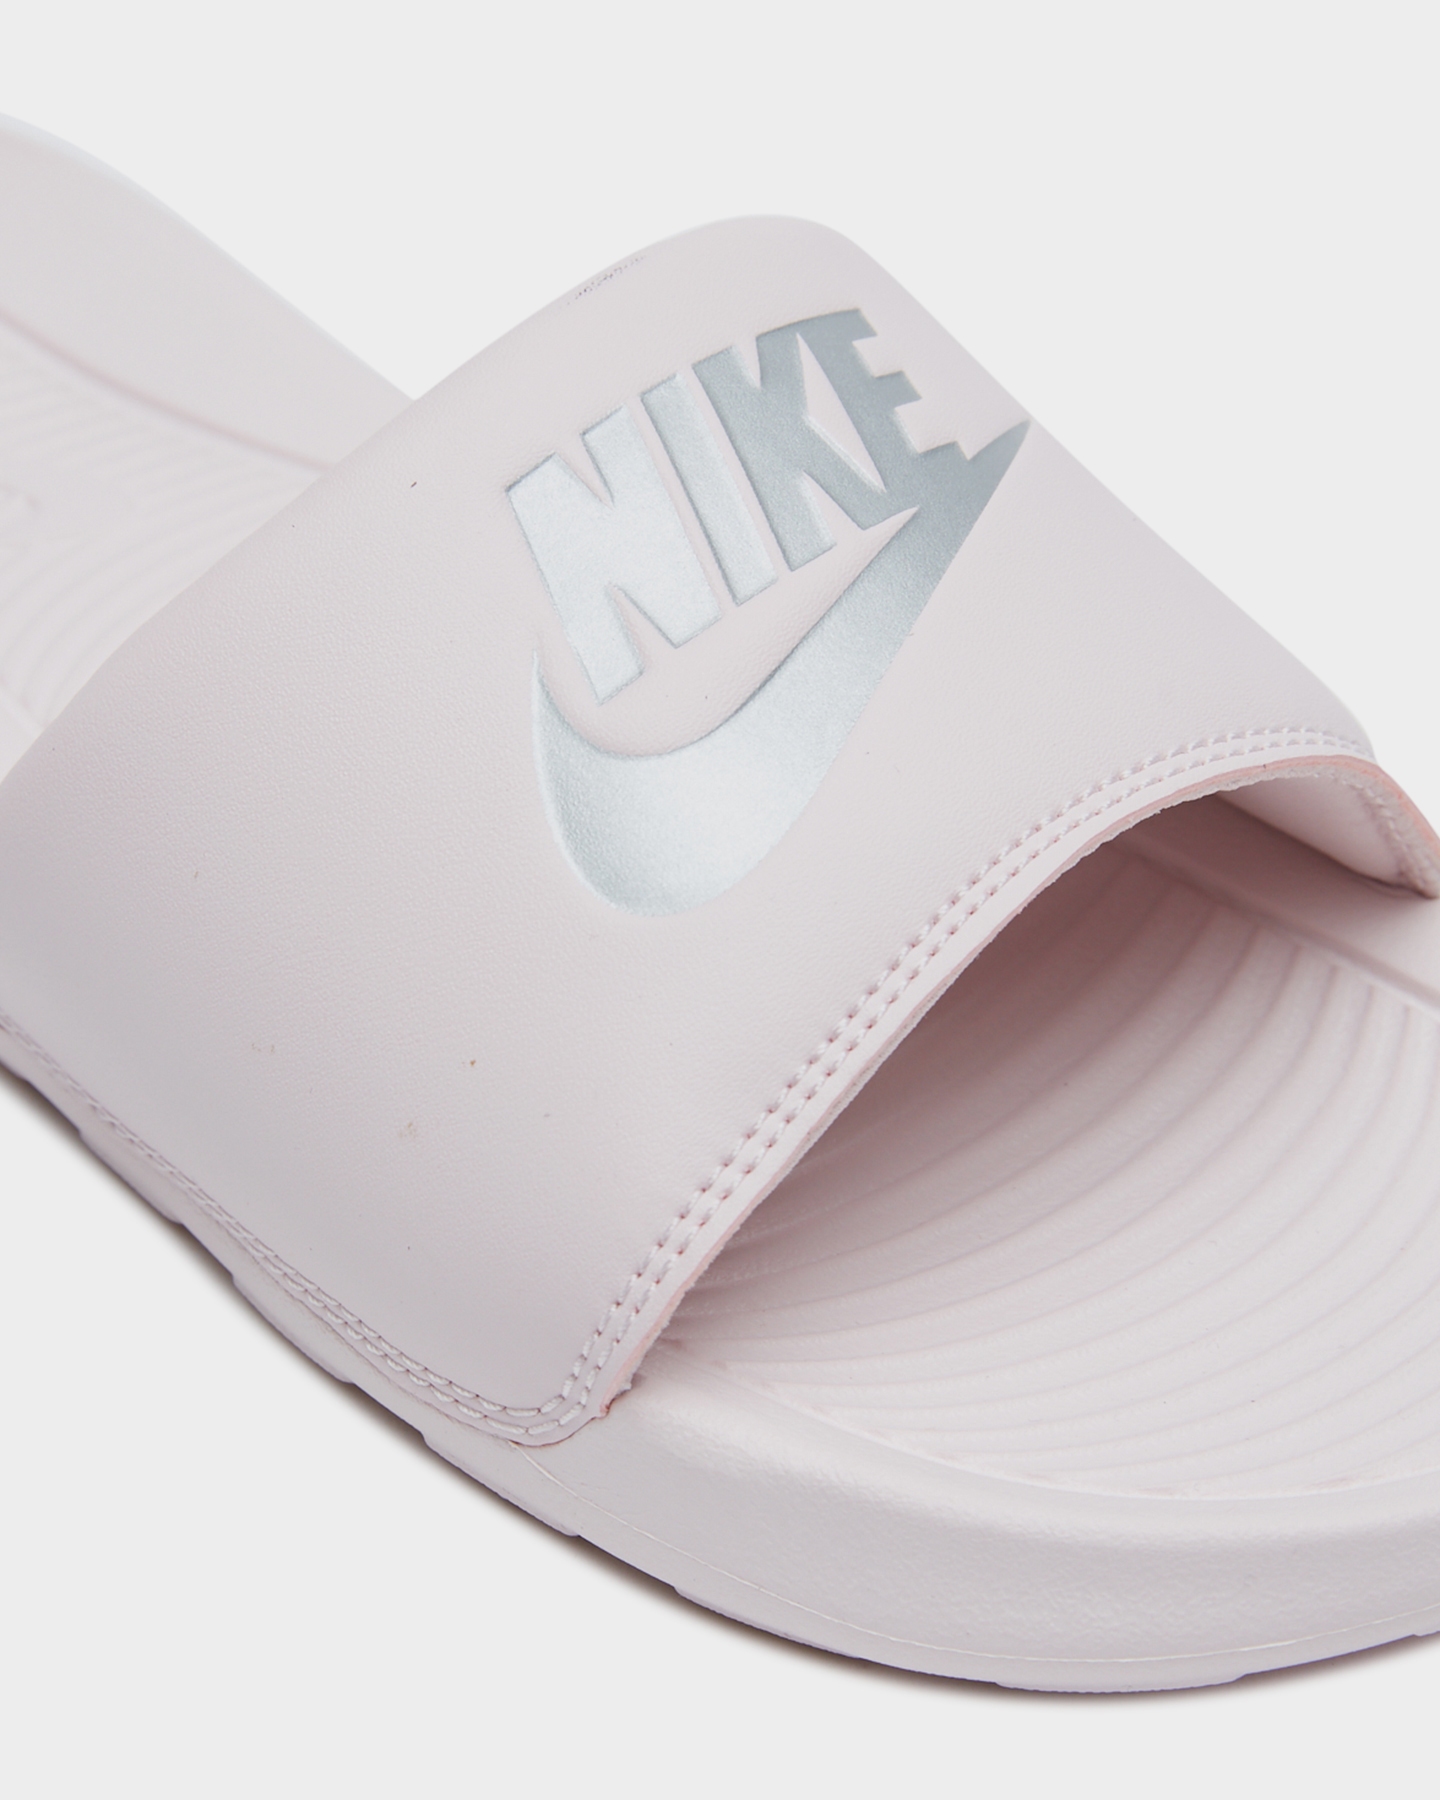 Nike Womens Victori One Slide - Barely Rose | SurfStitch